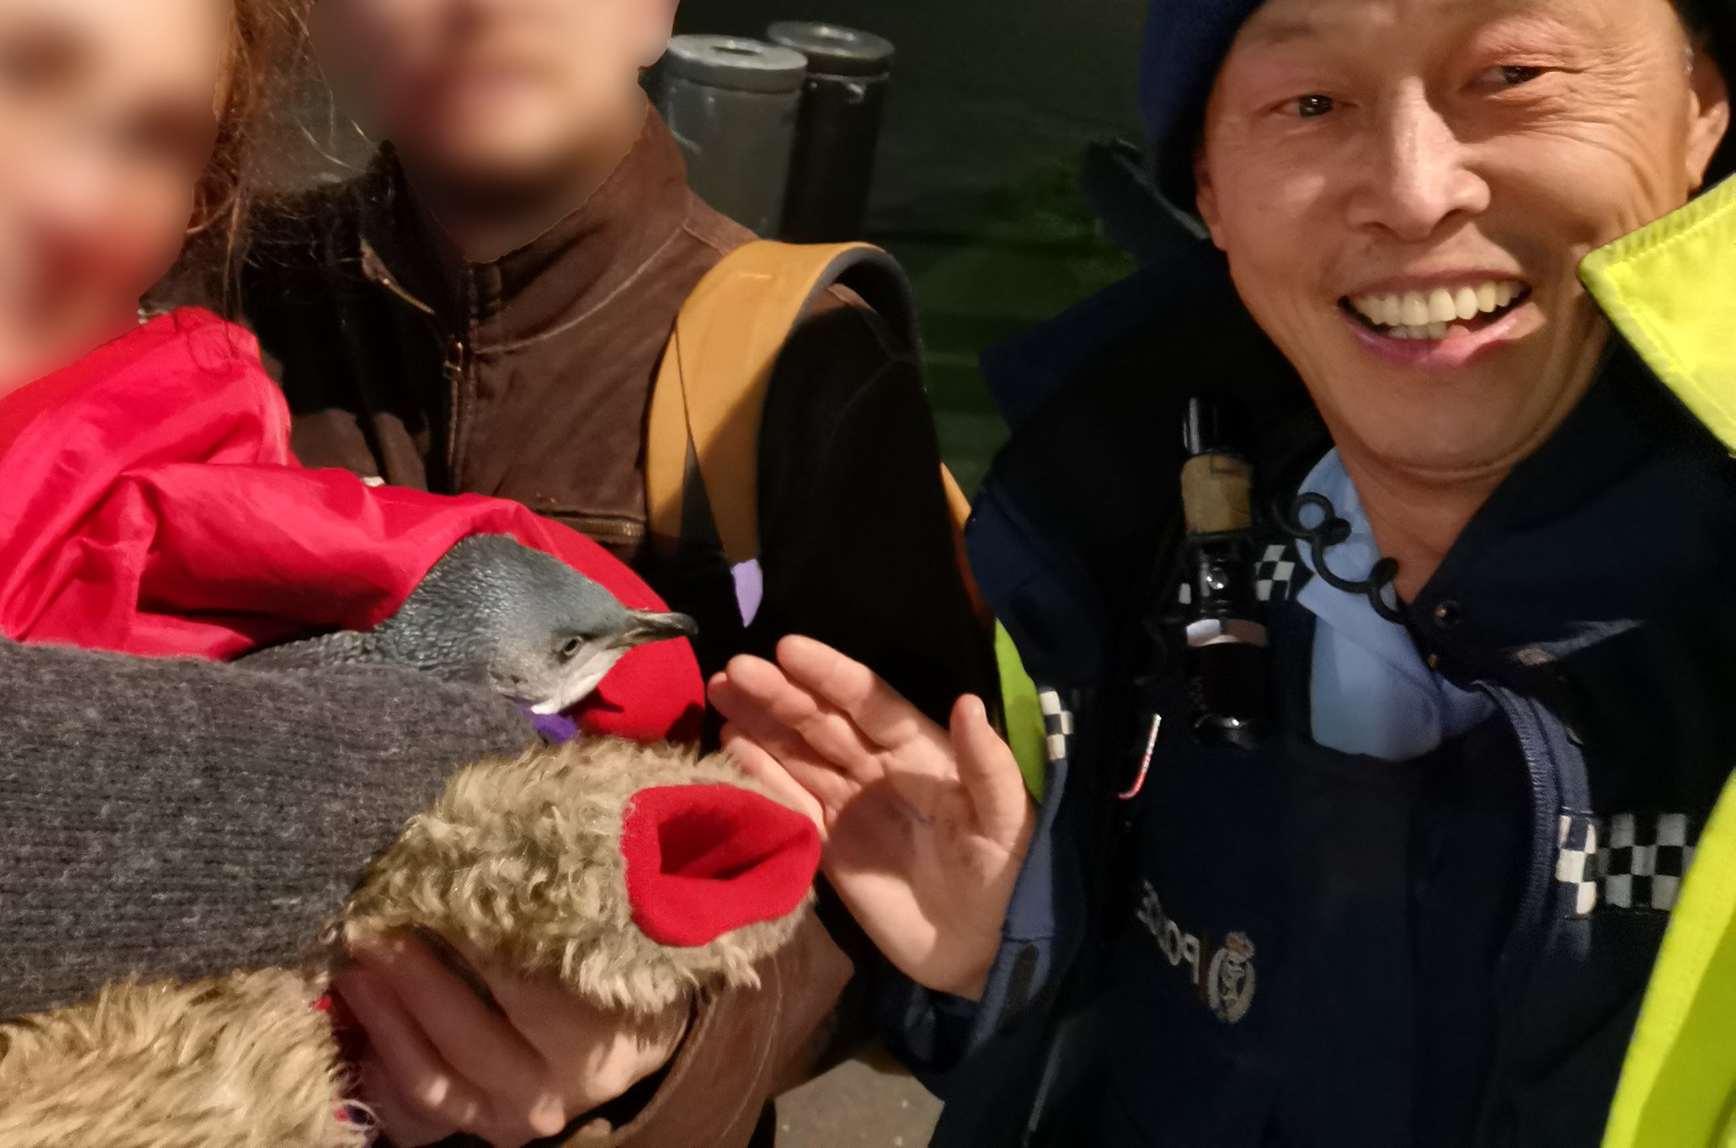 PHOTO: According to the Wellington District Police penguins were removed from a sushi stand on July 13, 2019.